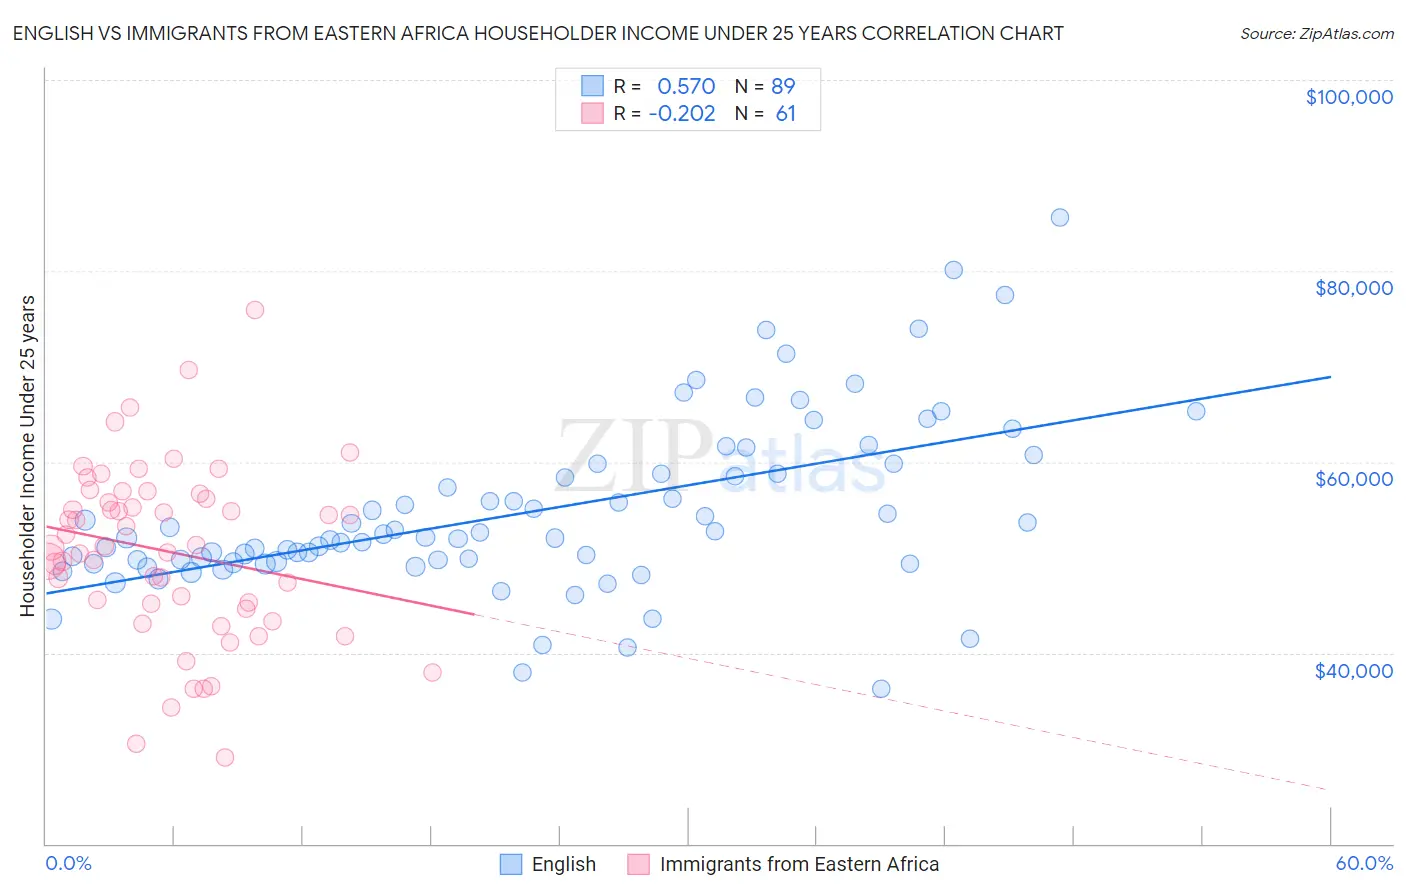 English vs Immigrants from Eastern Africa Householder Income Under 25 years